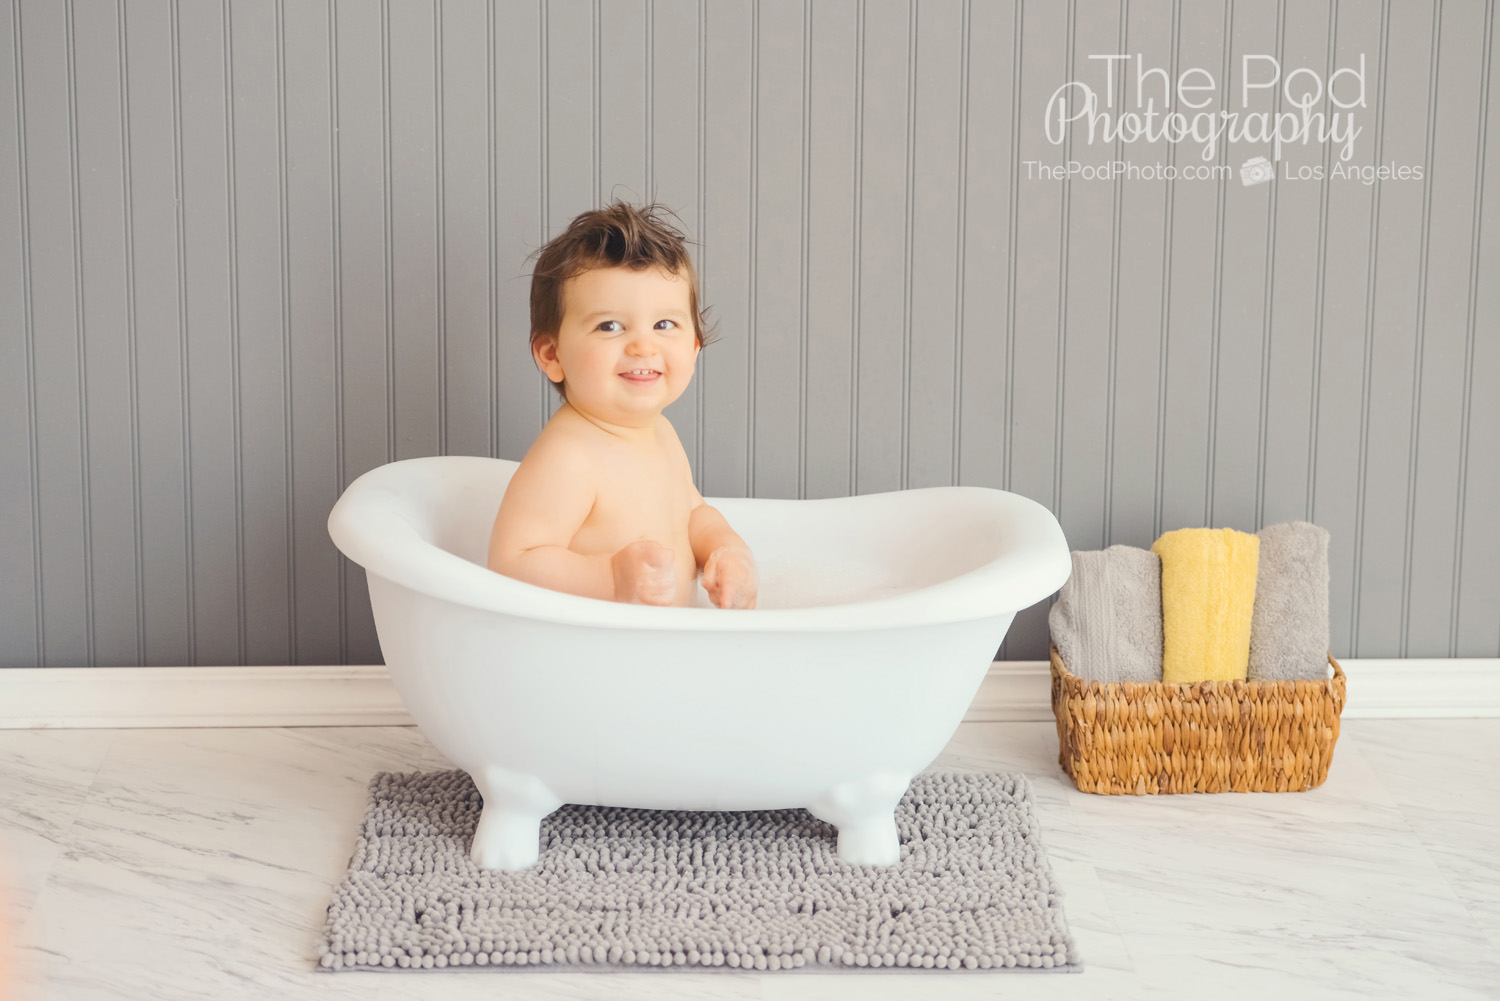 West LA Baby Photographer  Splash Sessions on Mini Bathtub Set! - Los  Angeles based photo studio, The Pod Photography, specializing in maternity,  newborn, baby, first birthday cake smash and family pictures.